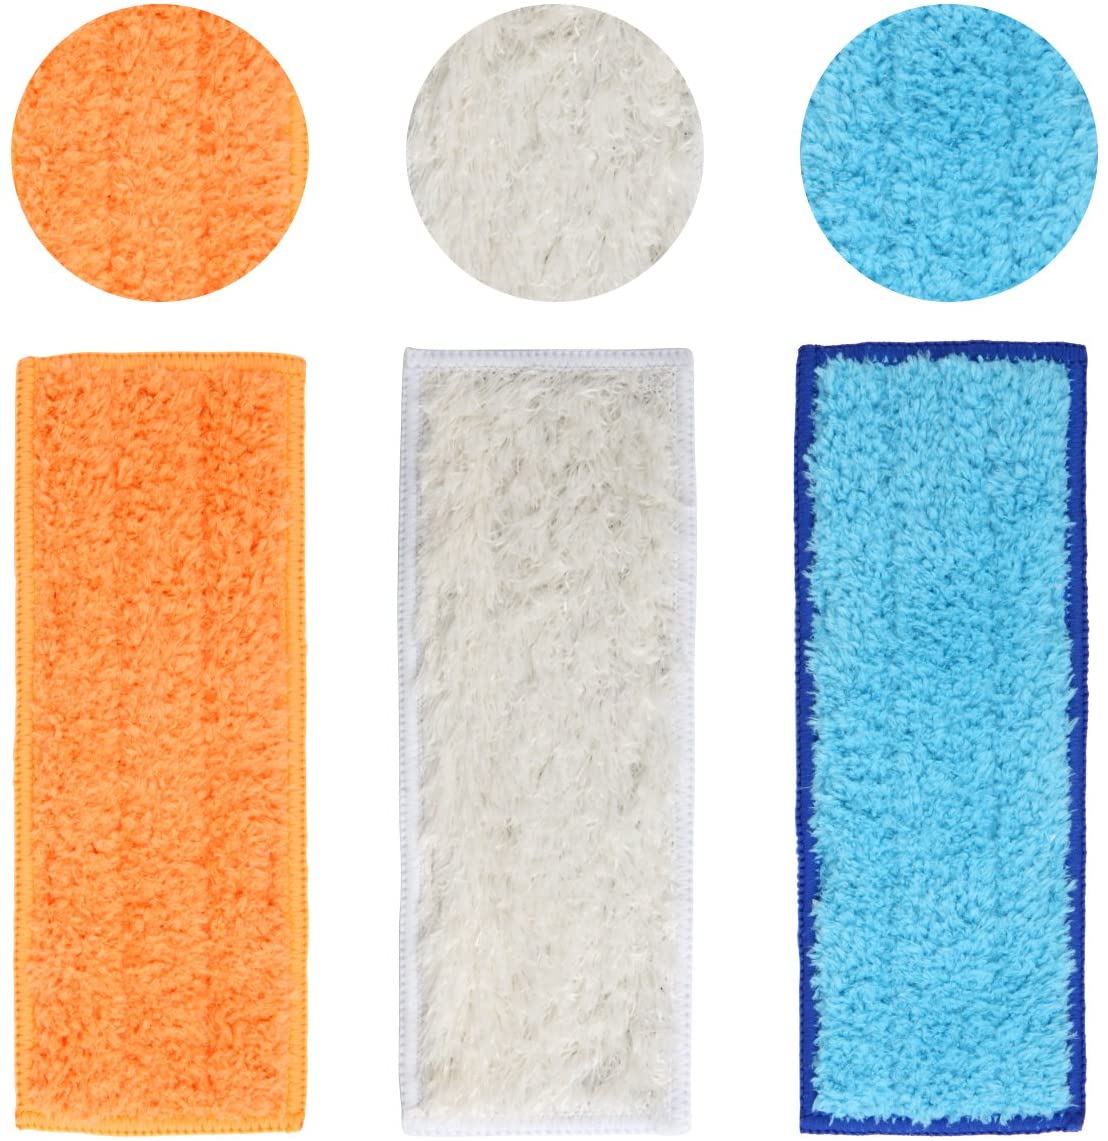  3pcs Washable Mopping Pads Cloth Replacement Parts For iRobot Braava Jet 240 241 Vacuum Cleaner Accessories  